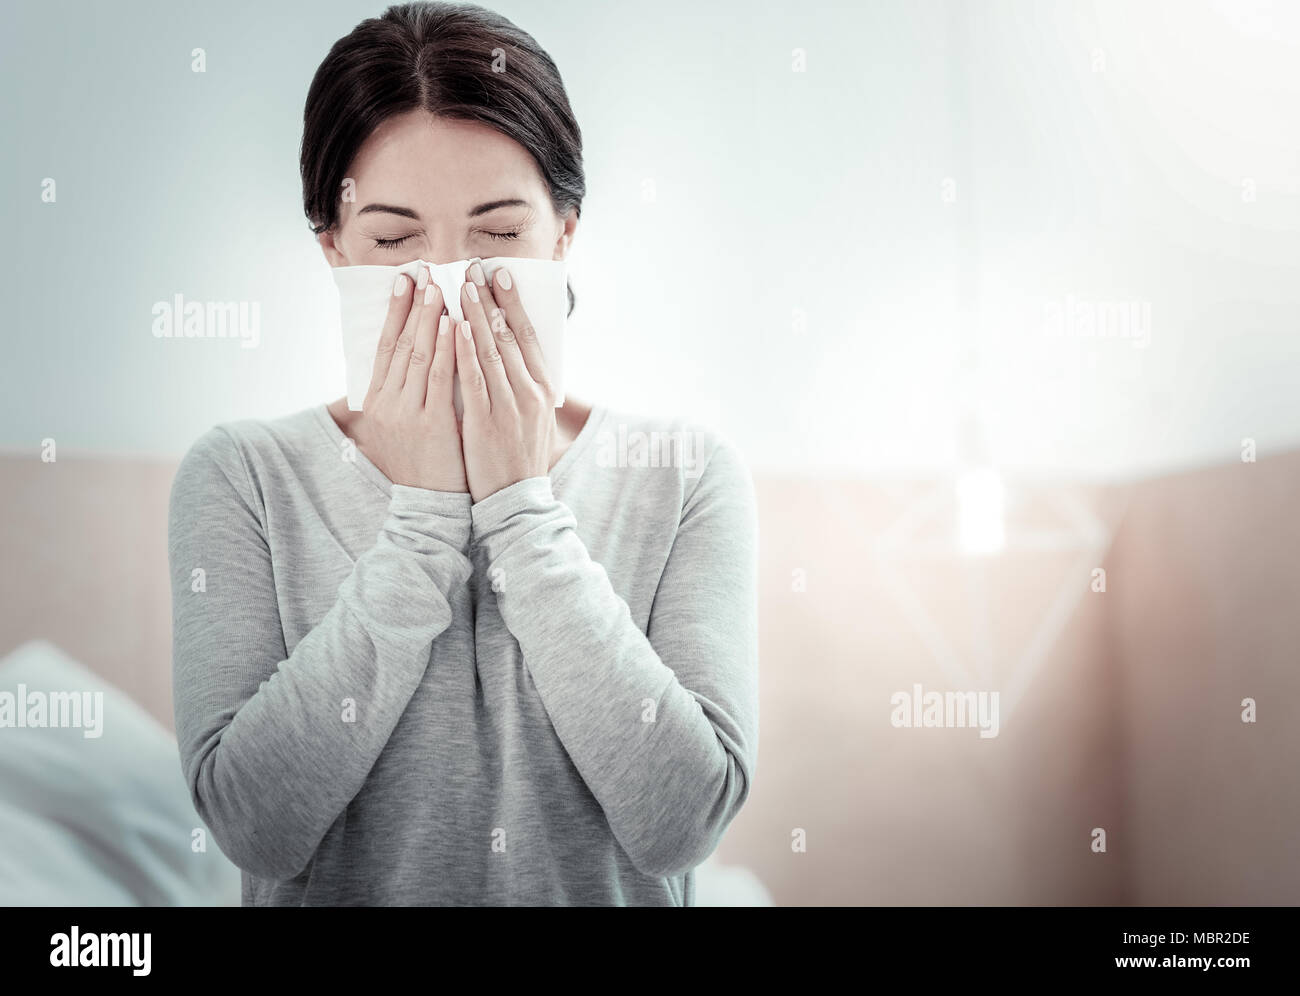 Tired sick woman closing eyes and sneezing. Stock Photo